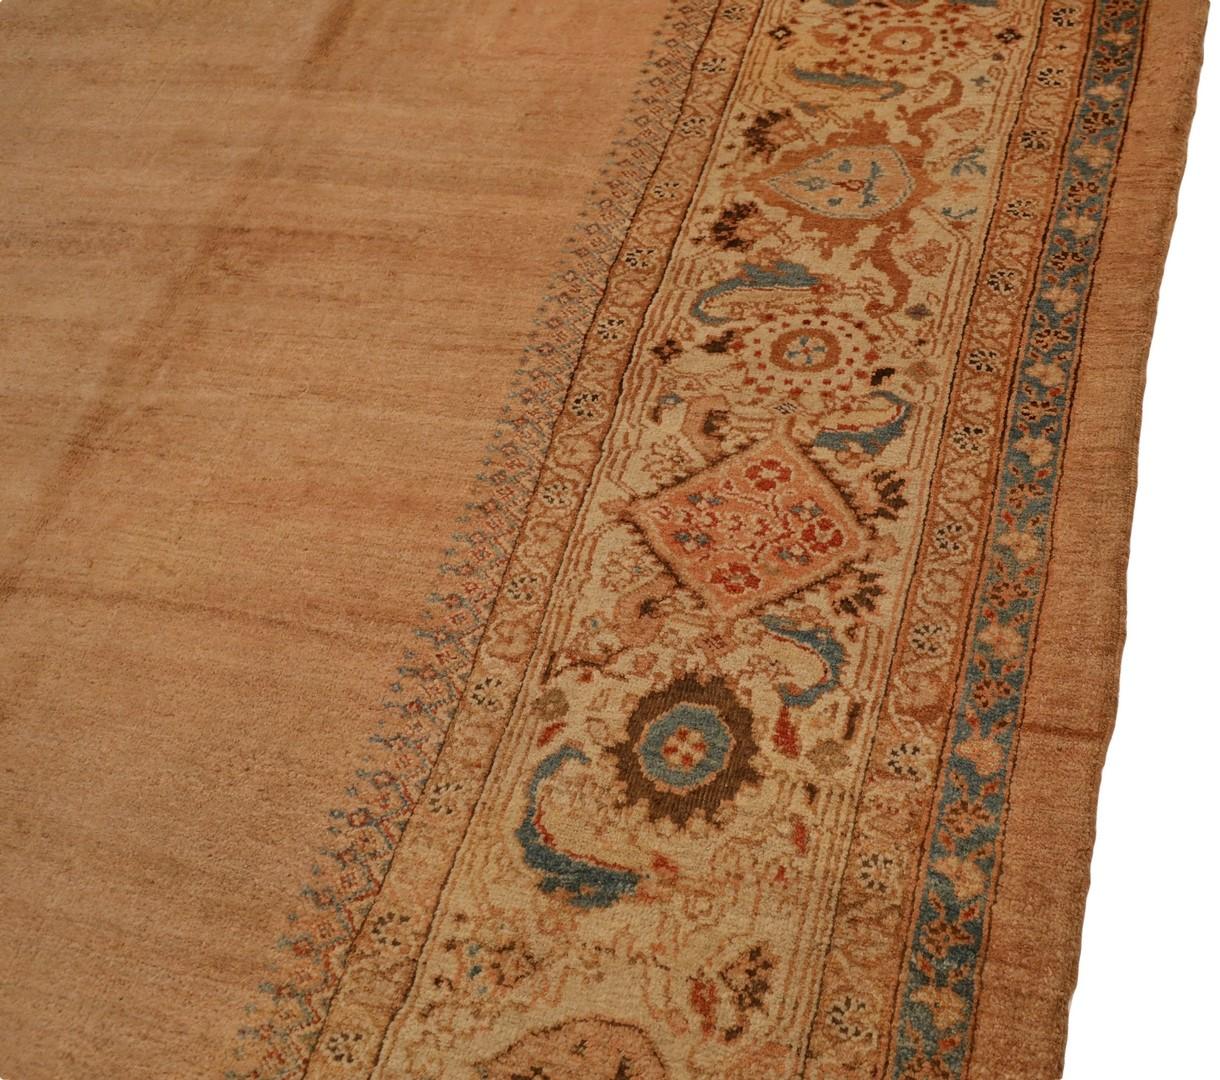 Hand-Knotted Ziegler-Sultanabad Antique Beige Open Field Rug, Late 1800s - 12'5